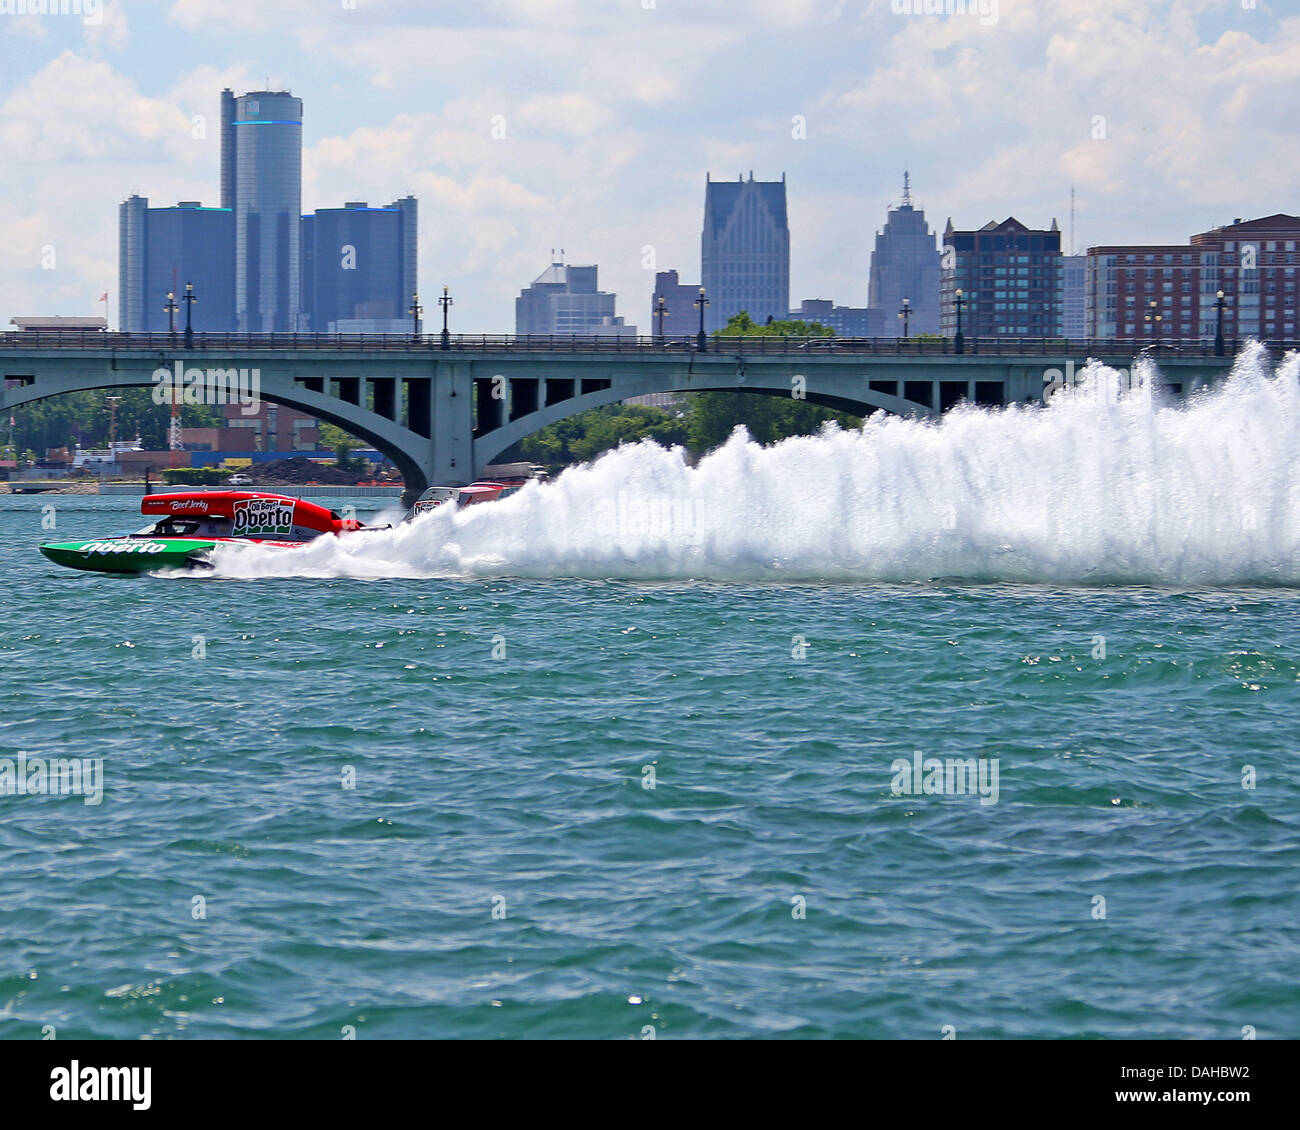 Detroit, MI, USA. 13th July, 2013. Steve David (1) pilots his Oh Boy! Oberto boat past the Belle Isle bridge and the Detroit skyline during heat 1a on the Detroit River on July 13, 2013 in Detroit, Michigan. Tom Turrill/CSM/Alamy Live News Stock Photo